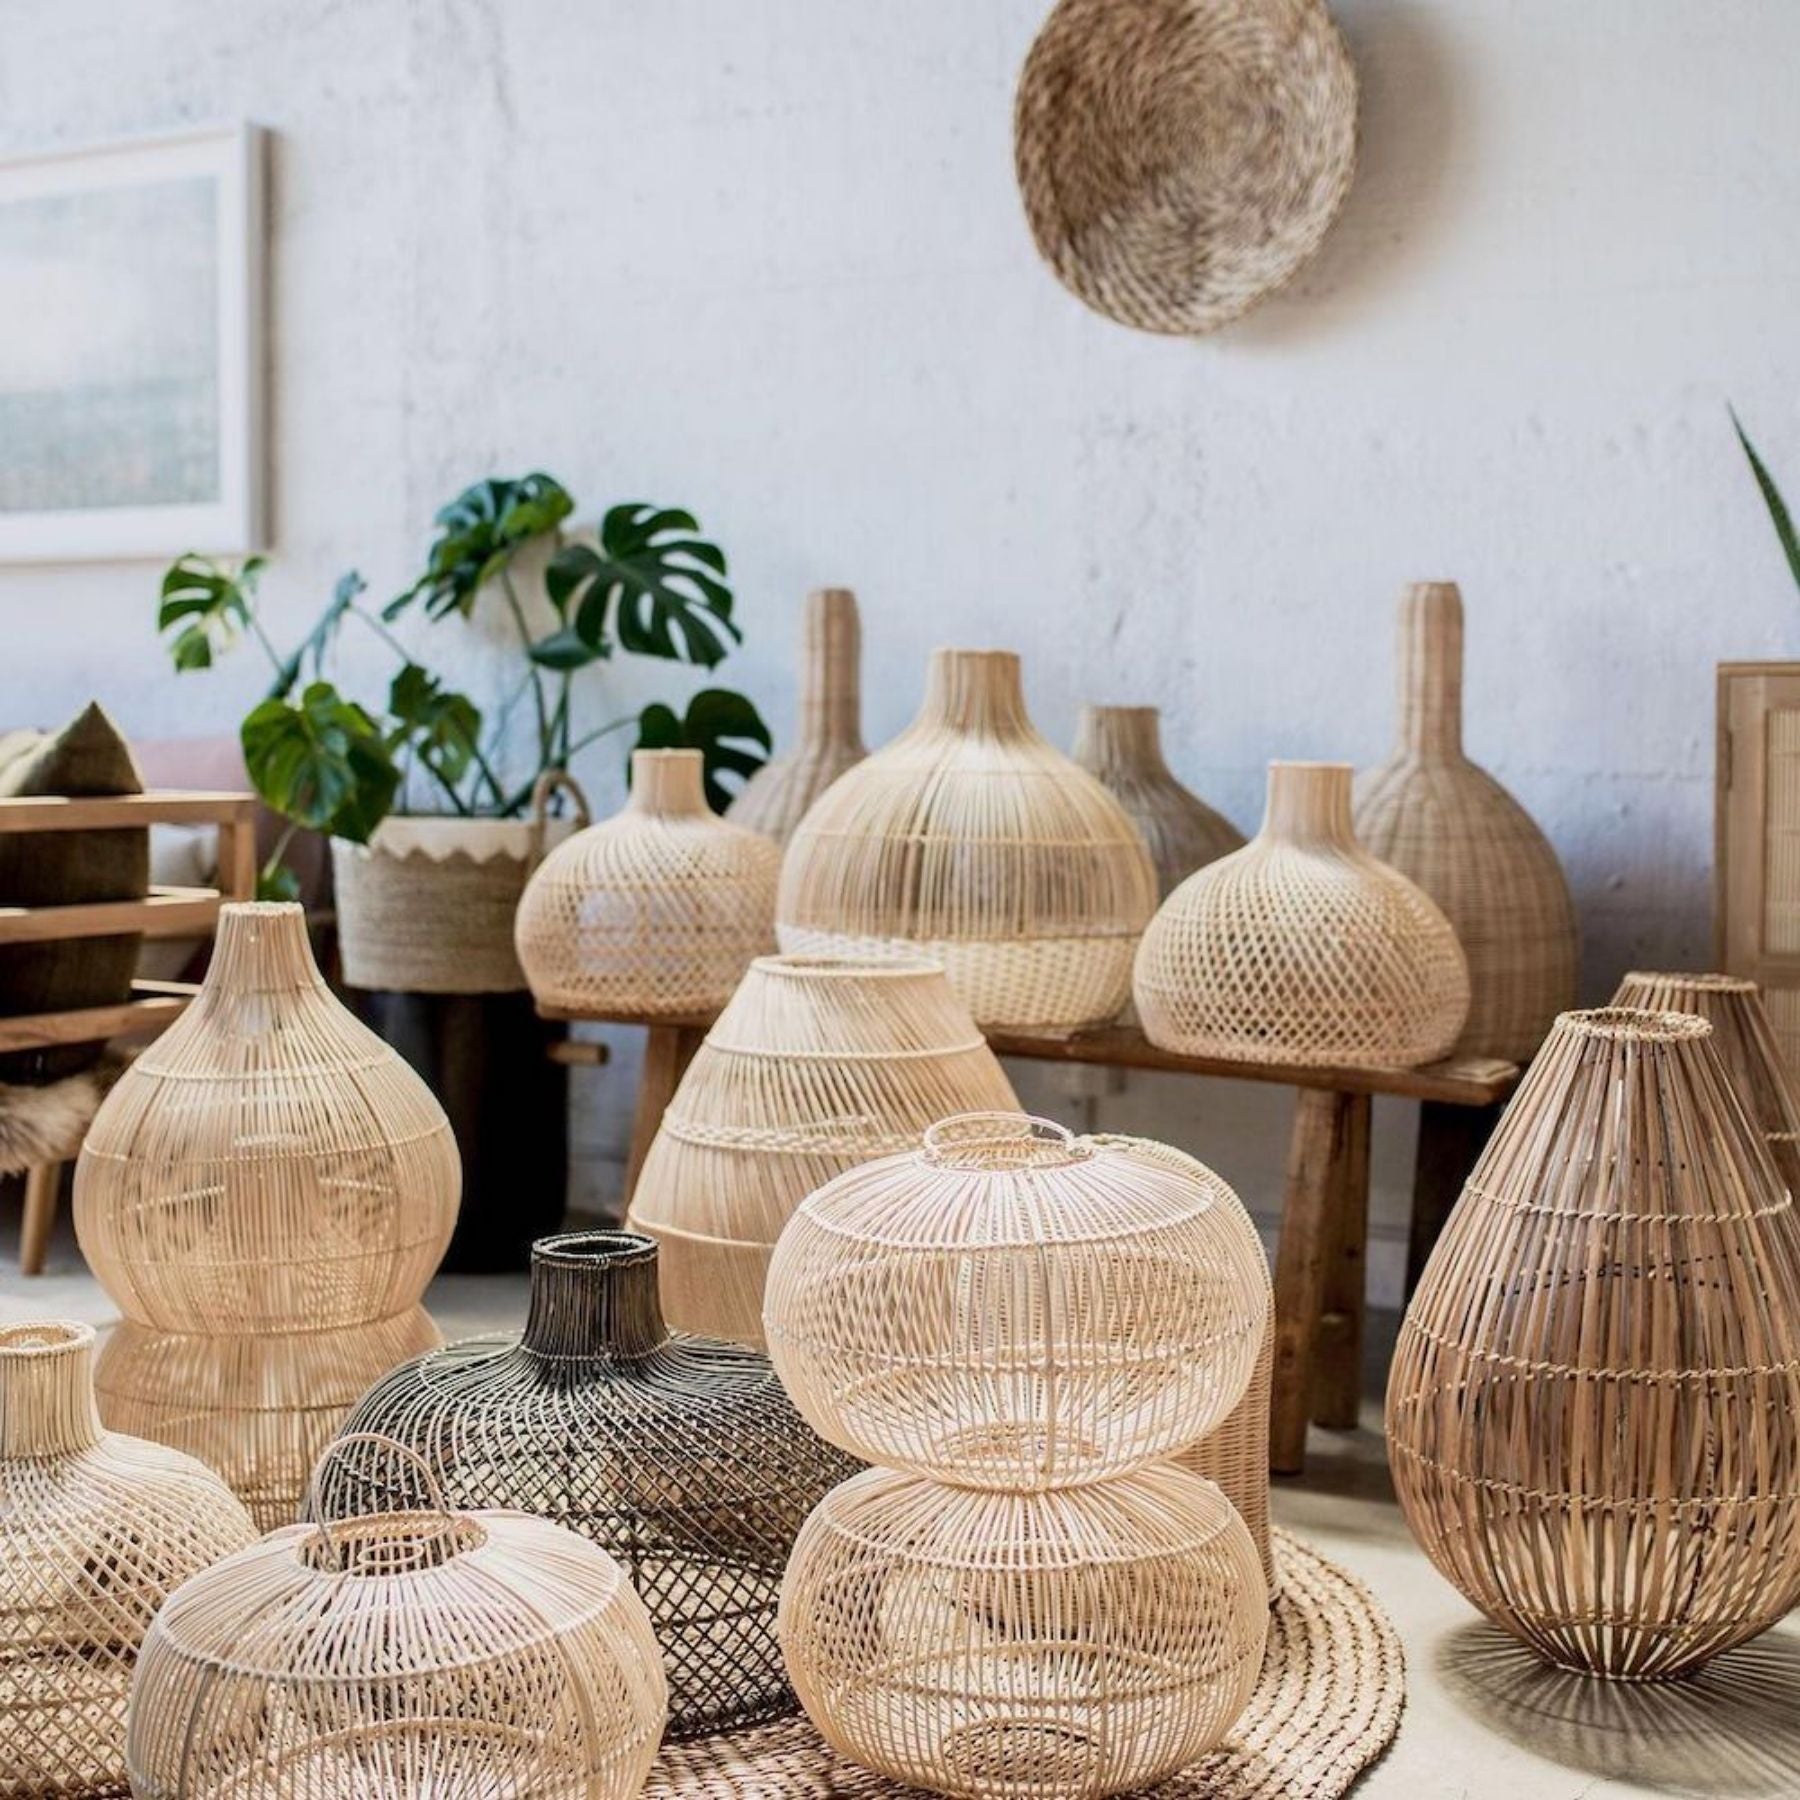 when you need to temporarily store rattan hanging lights choose a cool dry place